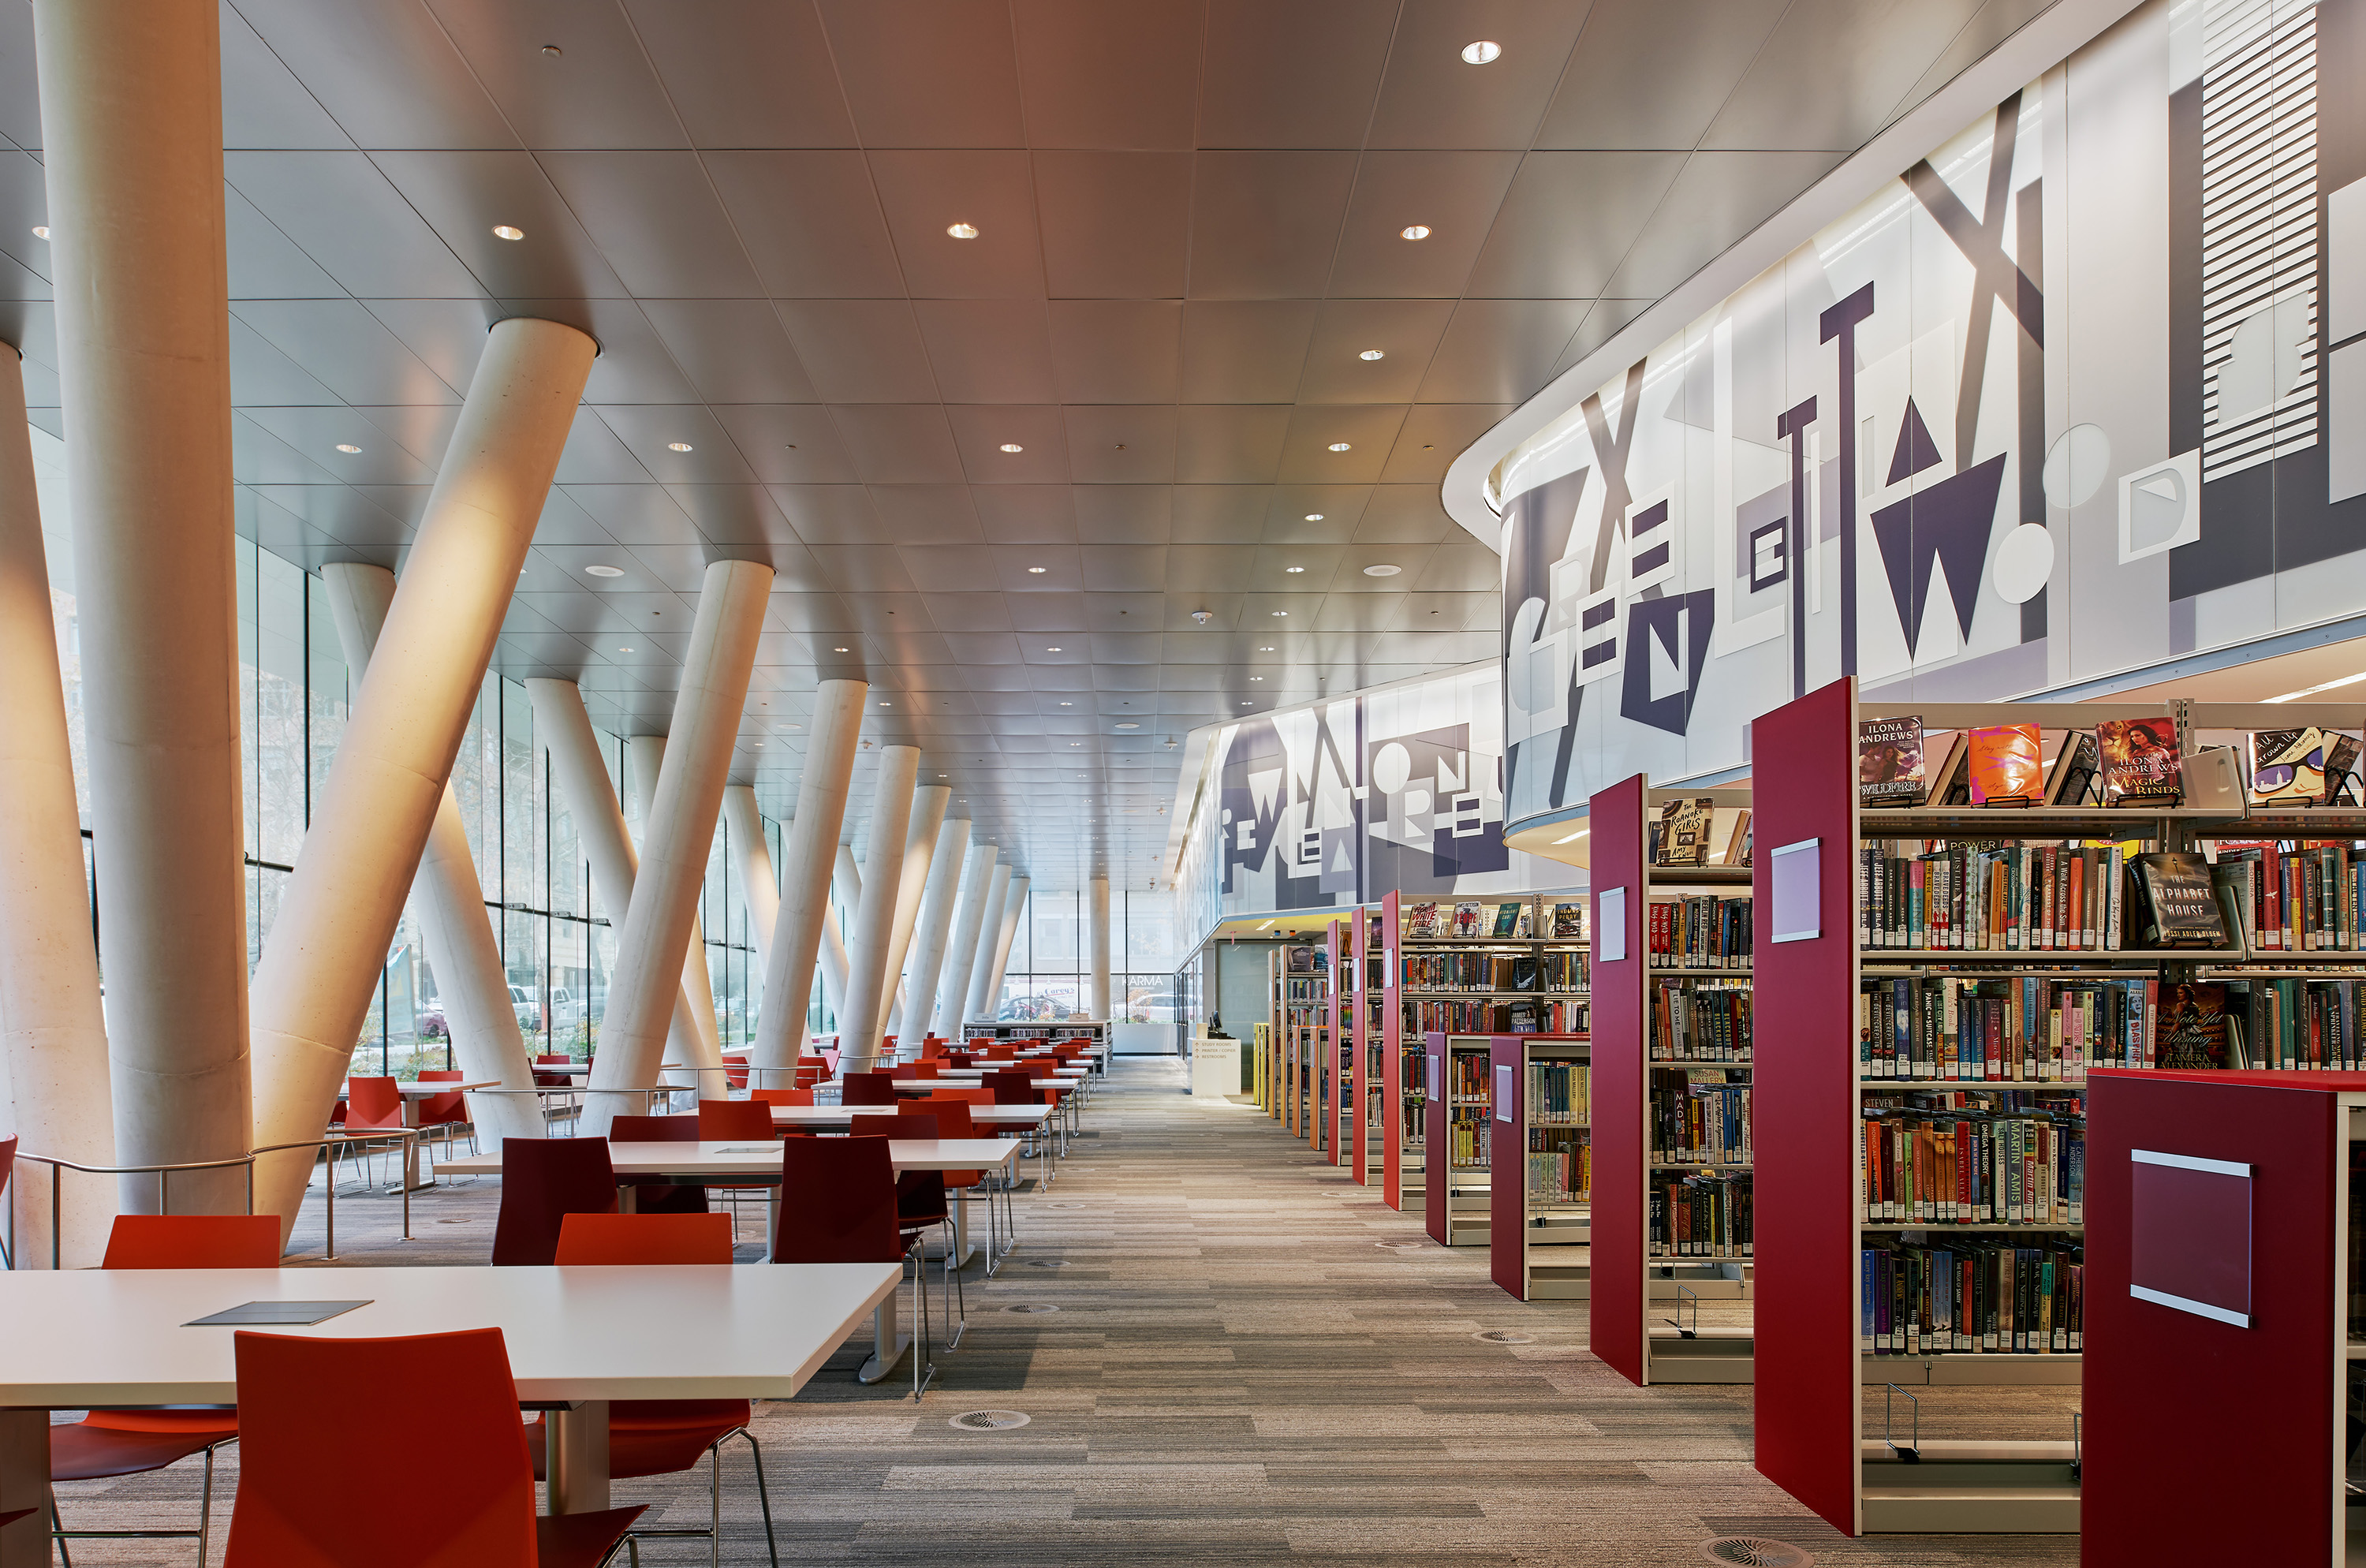 A LEED Gold-designed library and community space.